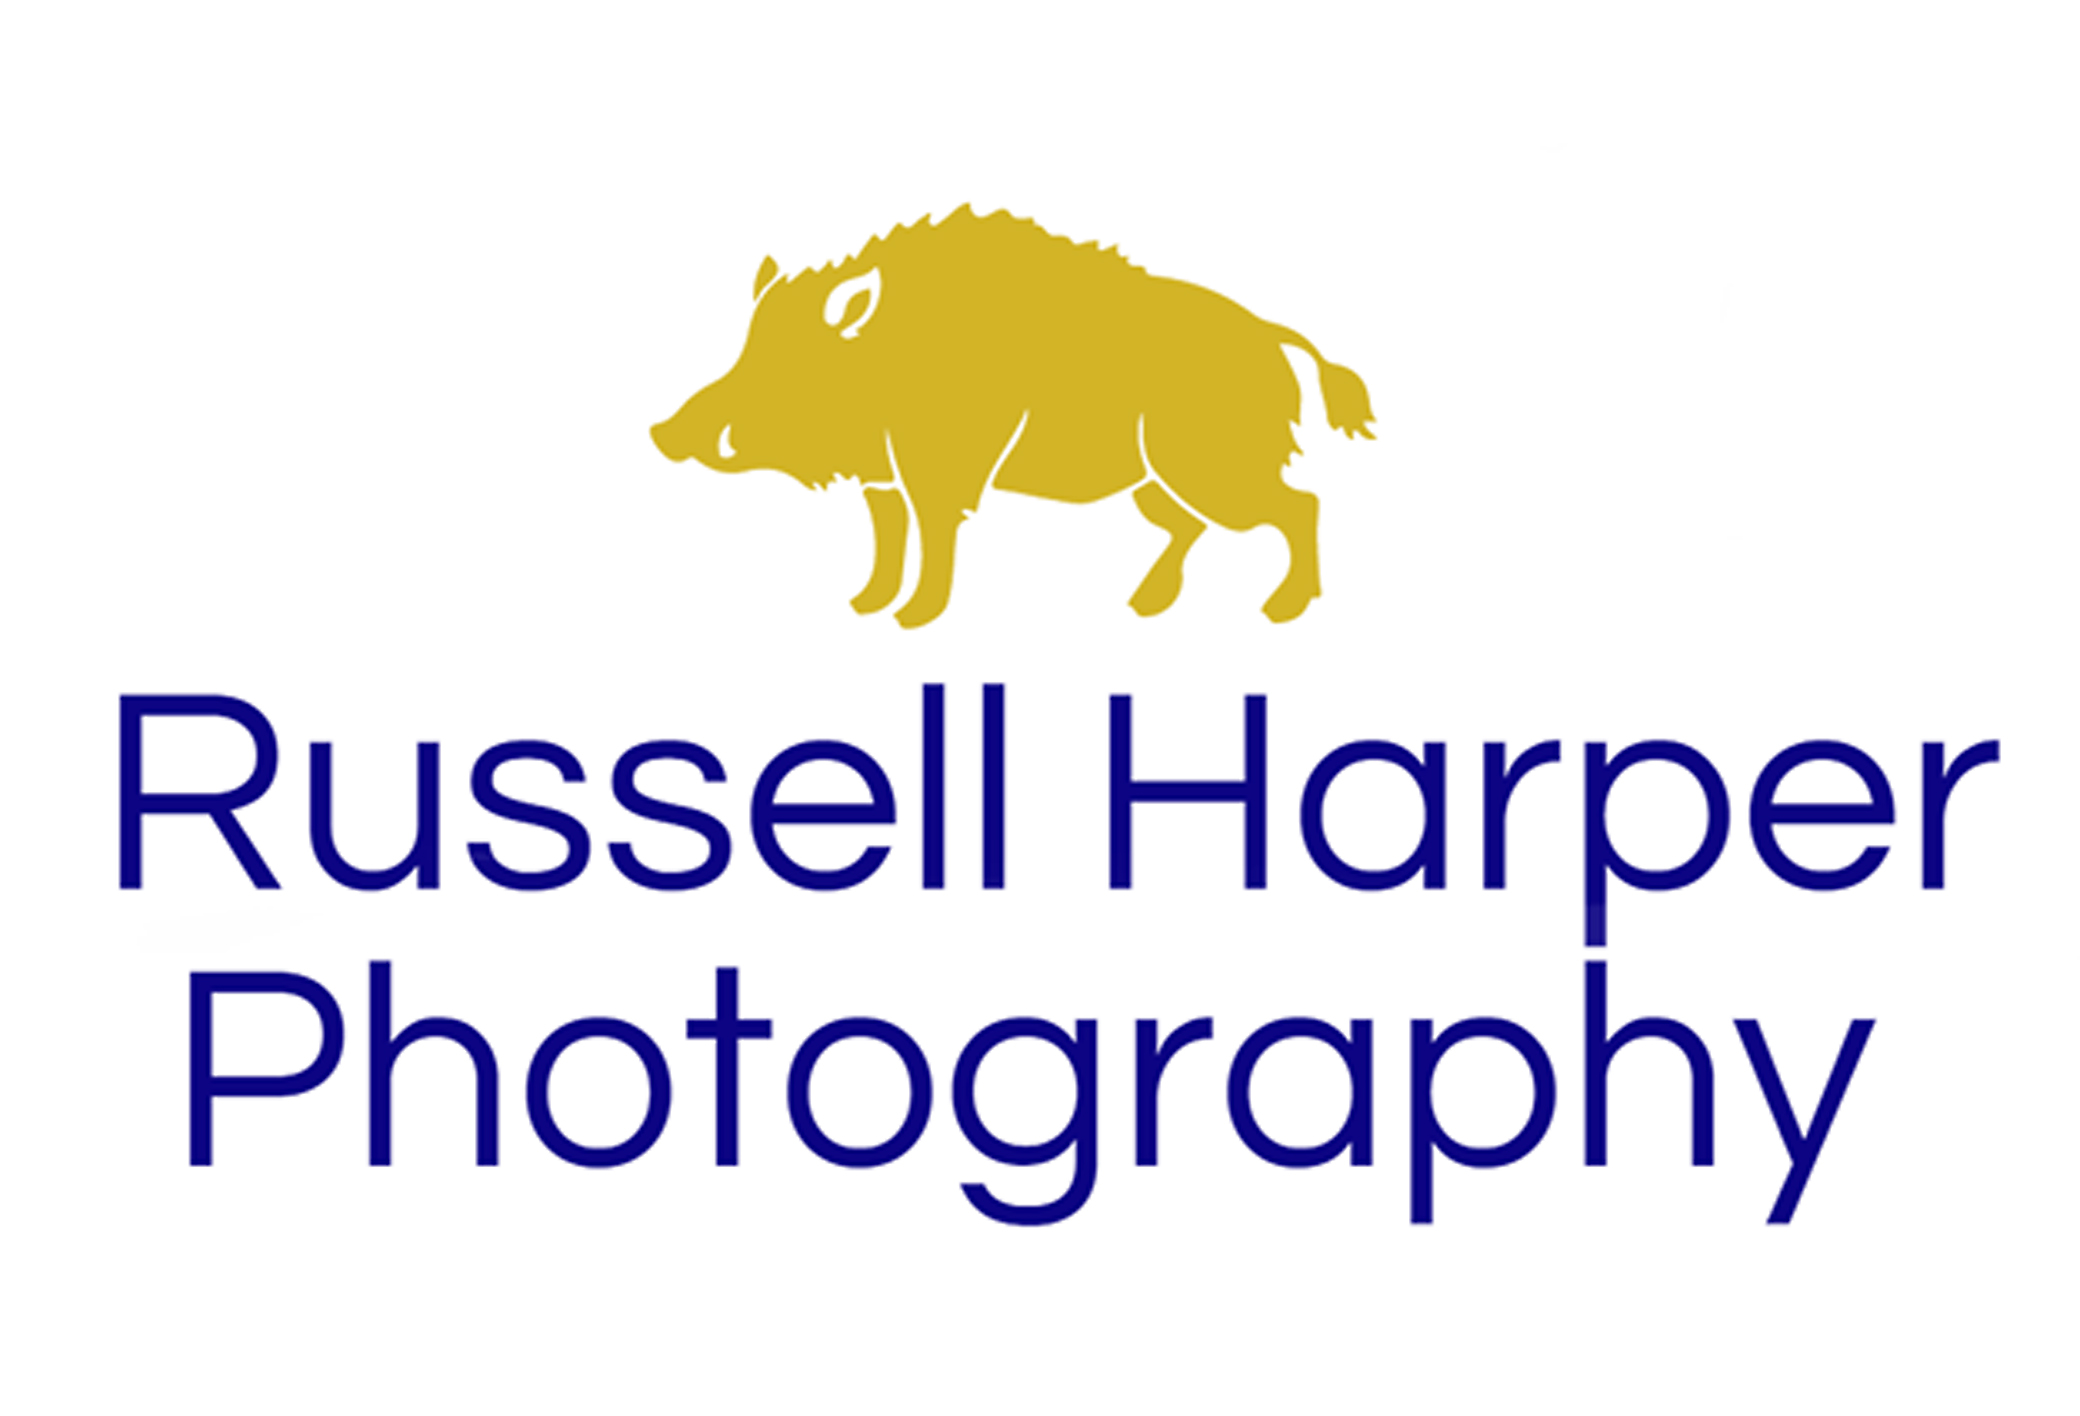 RUSSELL HARPER PHOTOGRAPHY